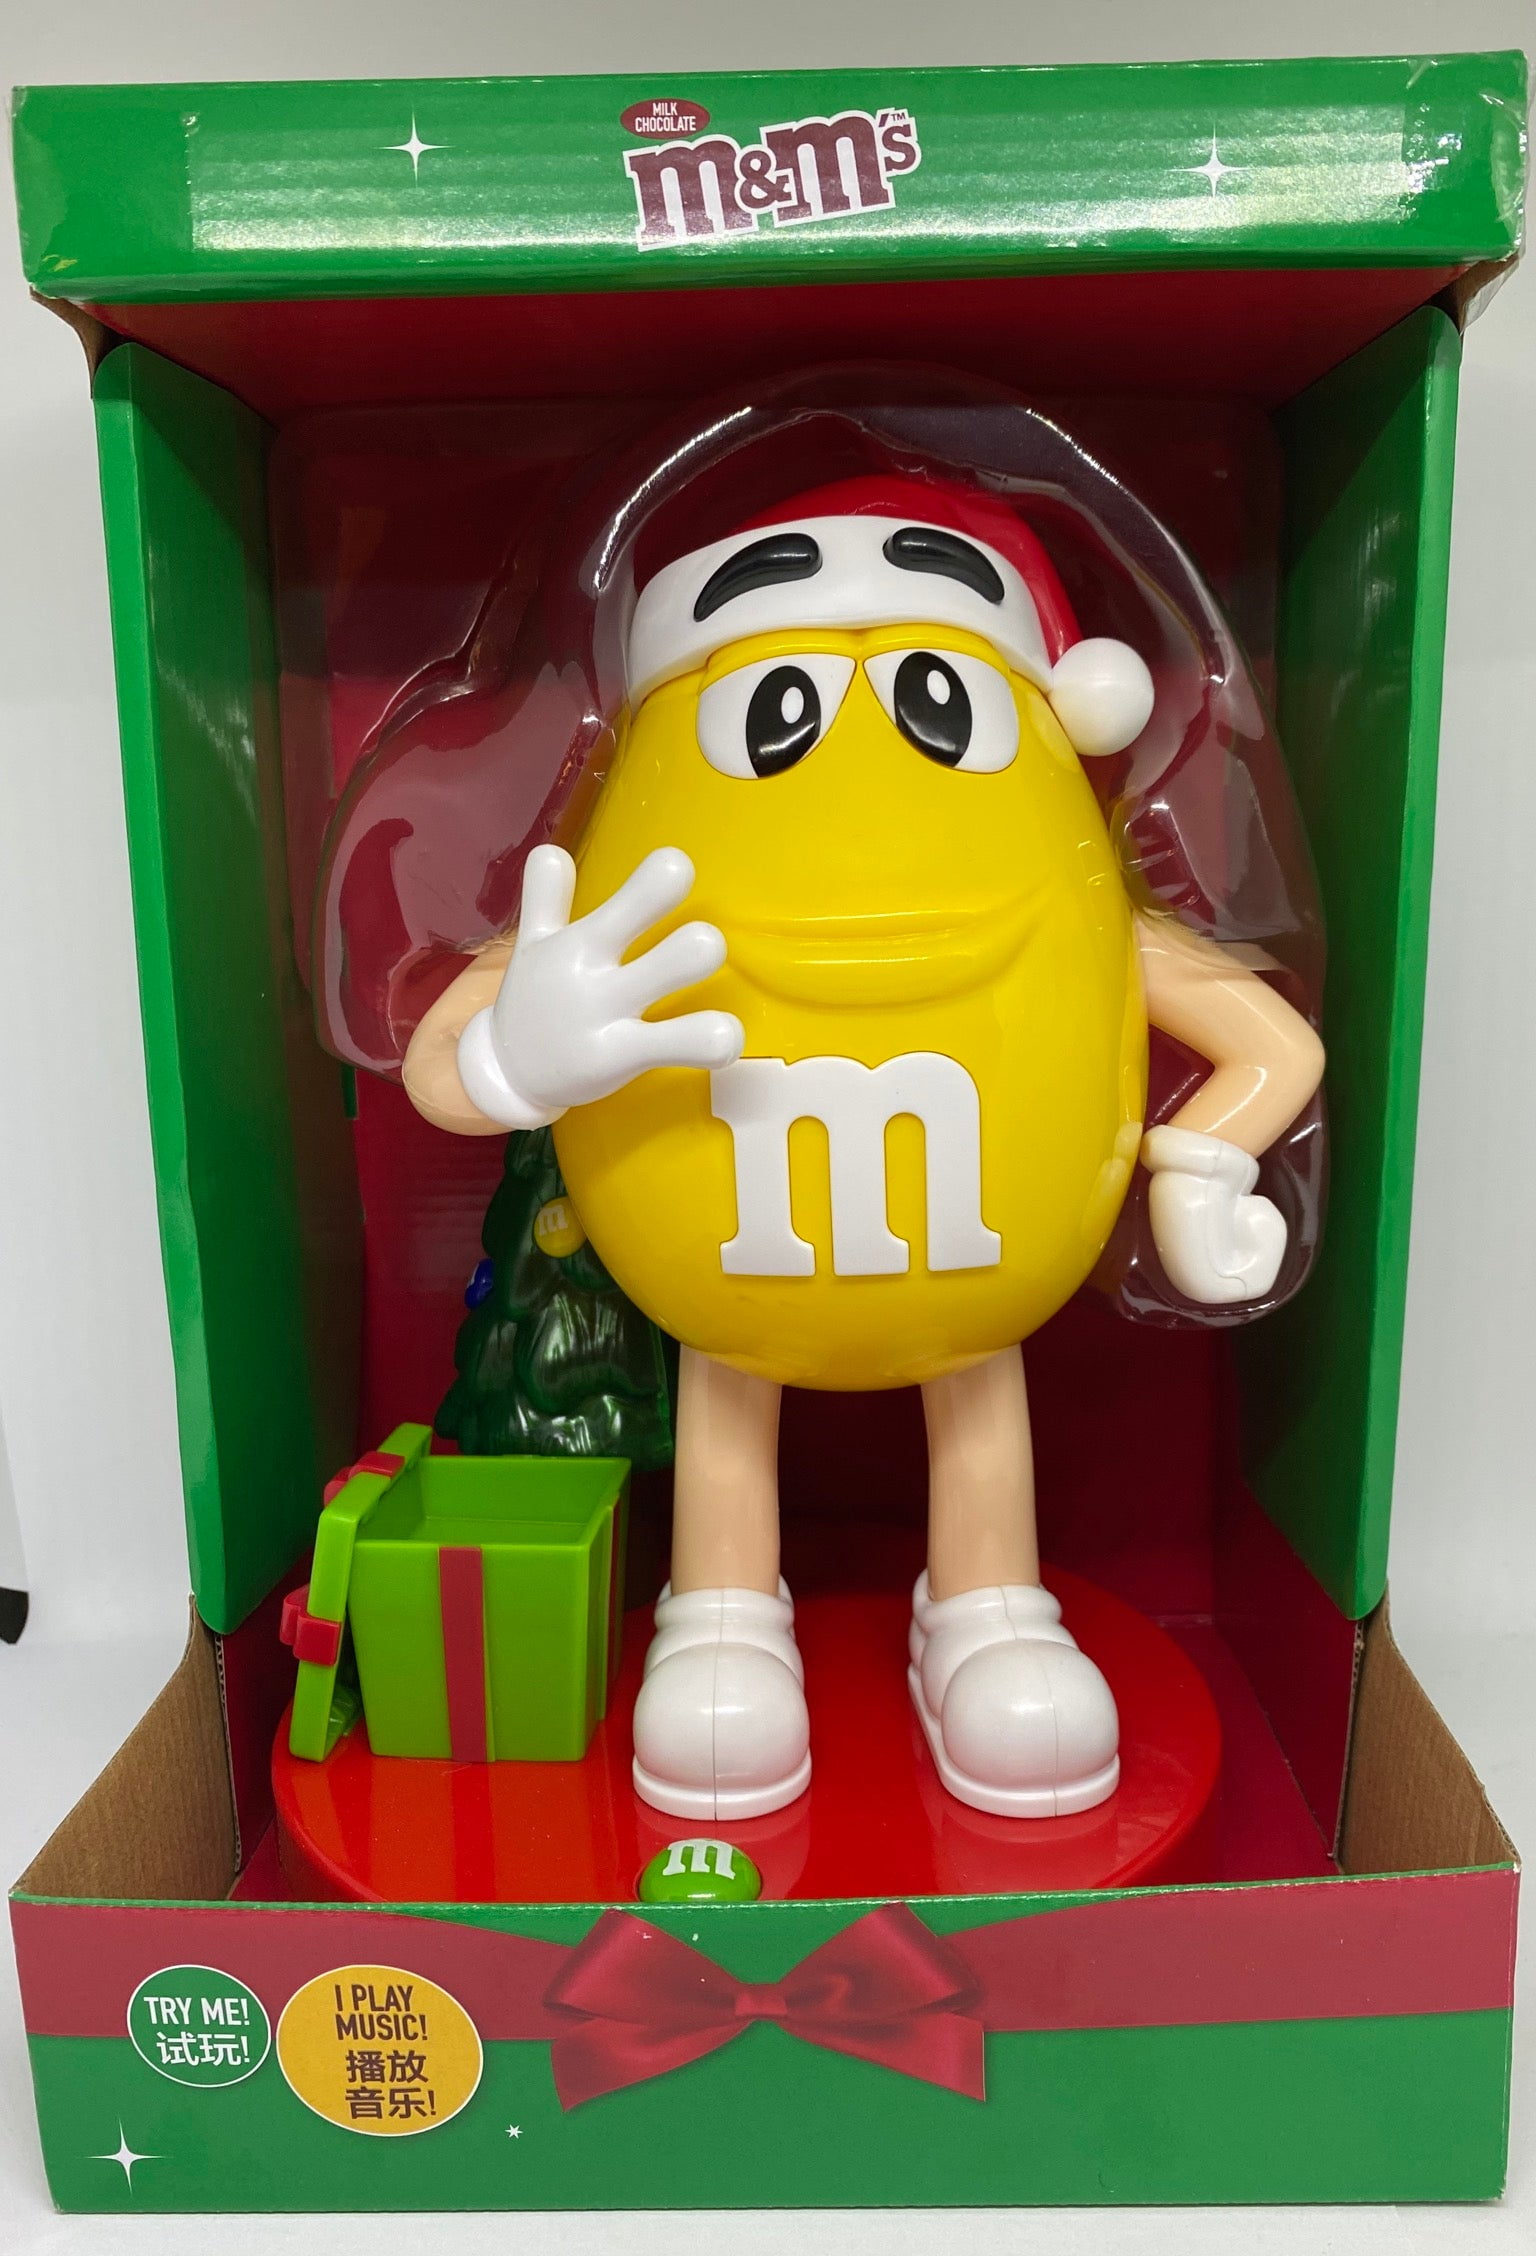 M&M's and Mars Gumball-Style Candy Dispenser Toy 25cm Gift Pack with Milk  Chocolate Candies, 45g, 173 g : : Grocery & Gourmet Foods